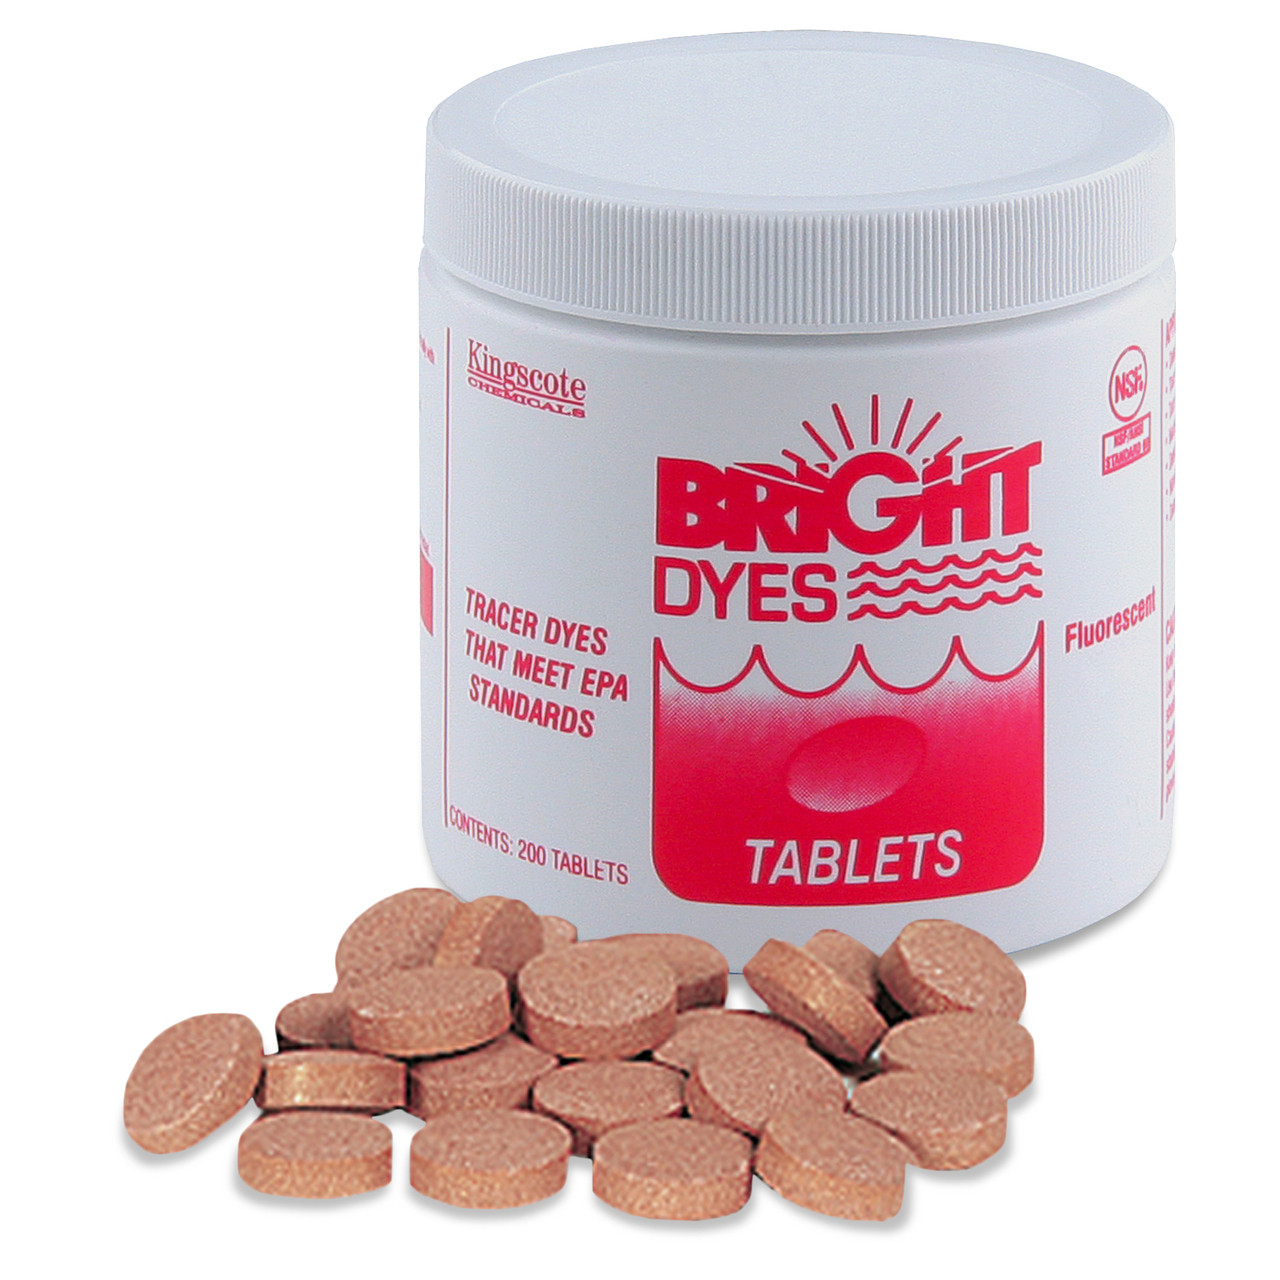 Bright Dyes Water Tracing Dye, Red, 200 Tablets - Performance